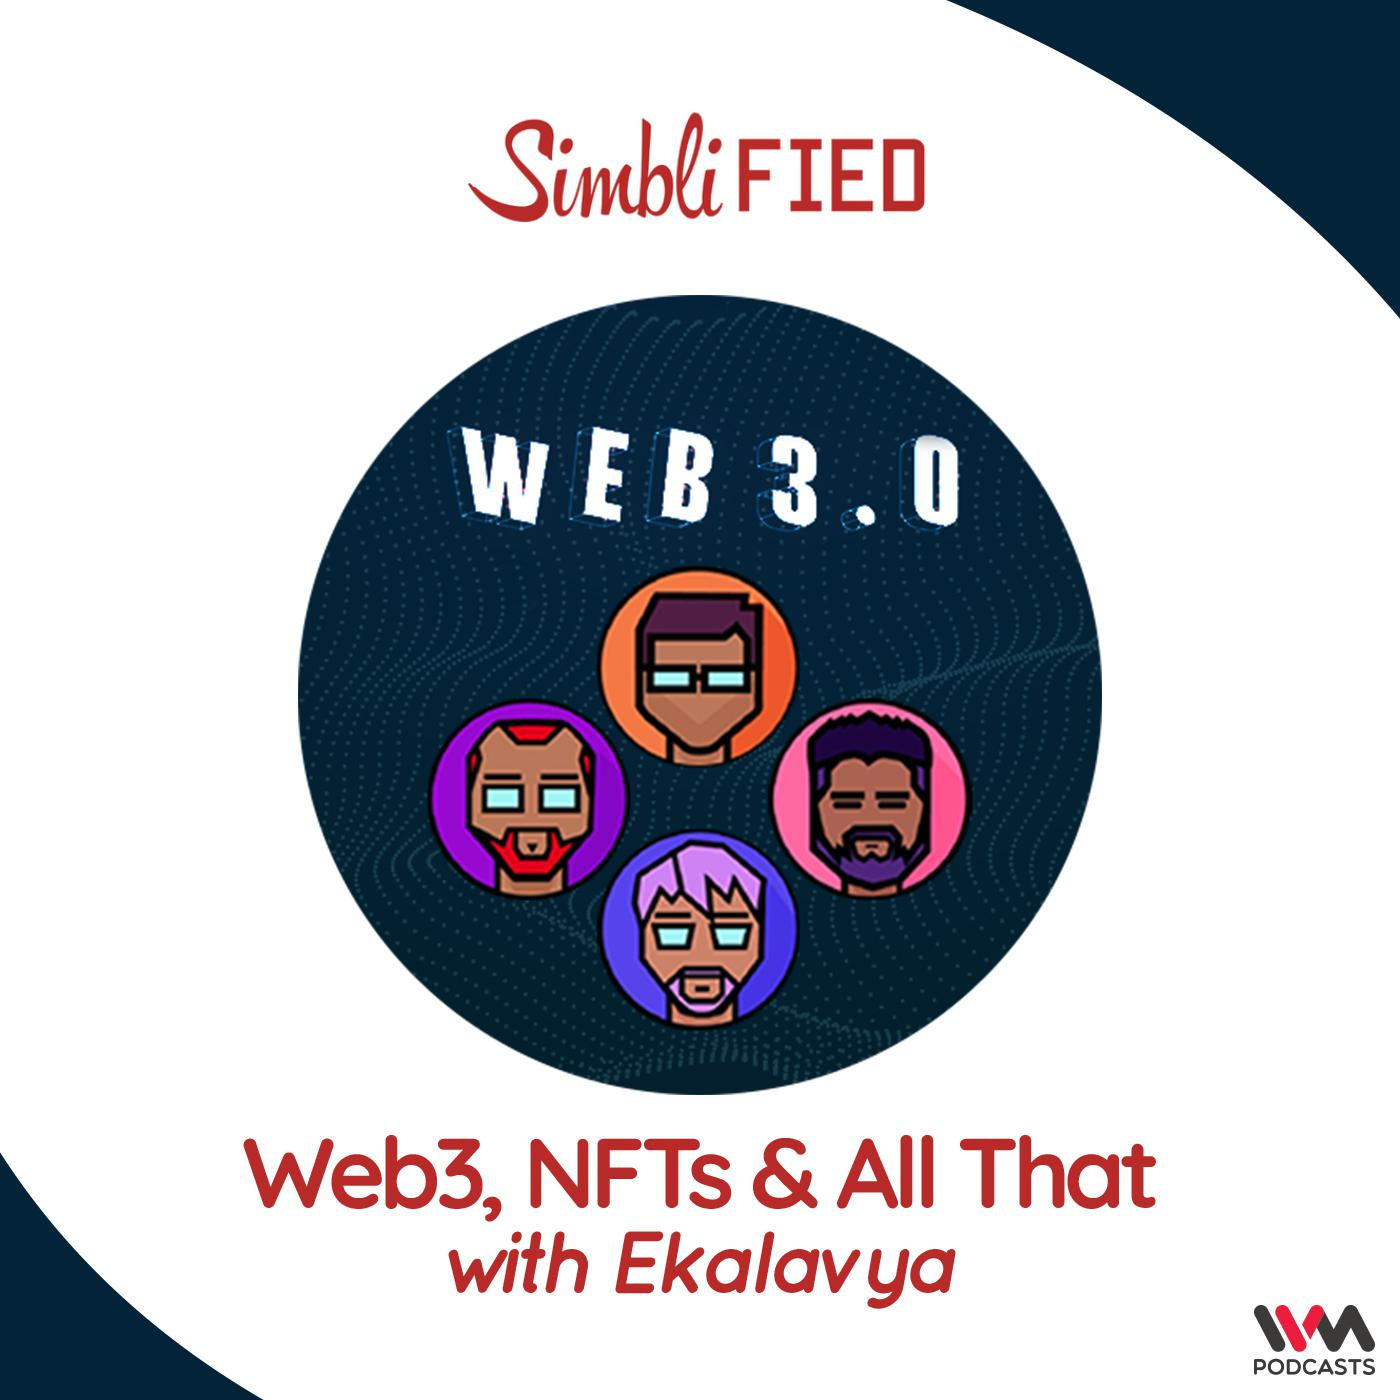 Web3, NFTs And All That: With Ekalavya (Part 2)